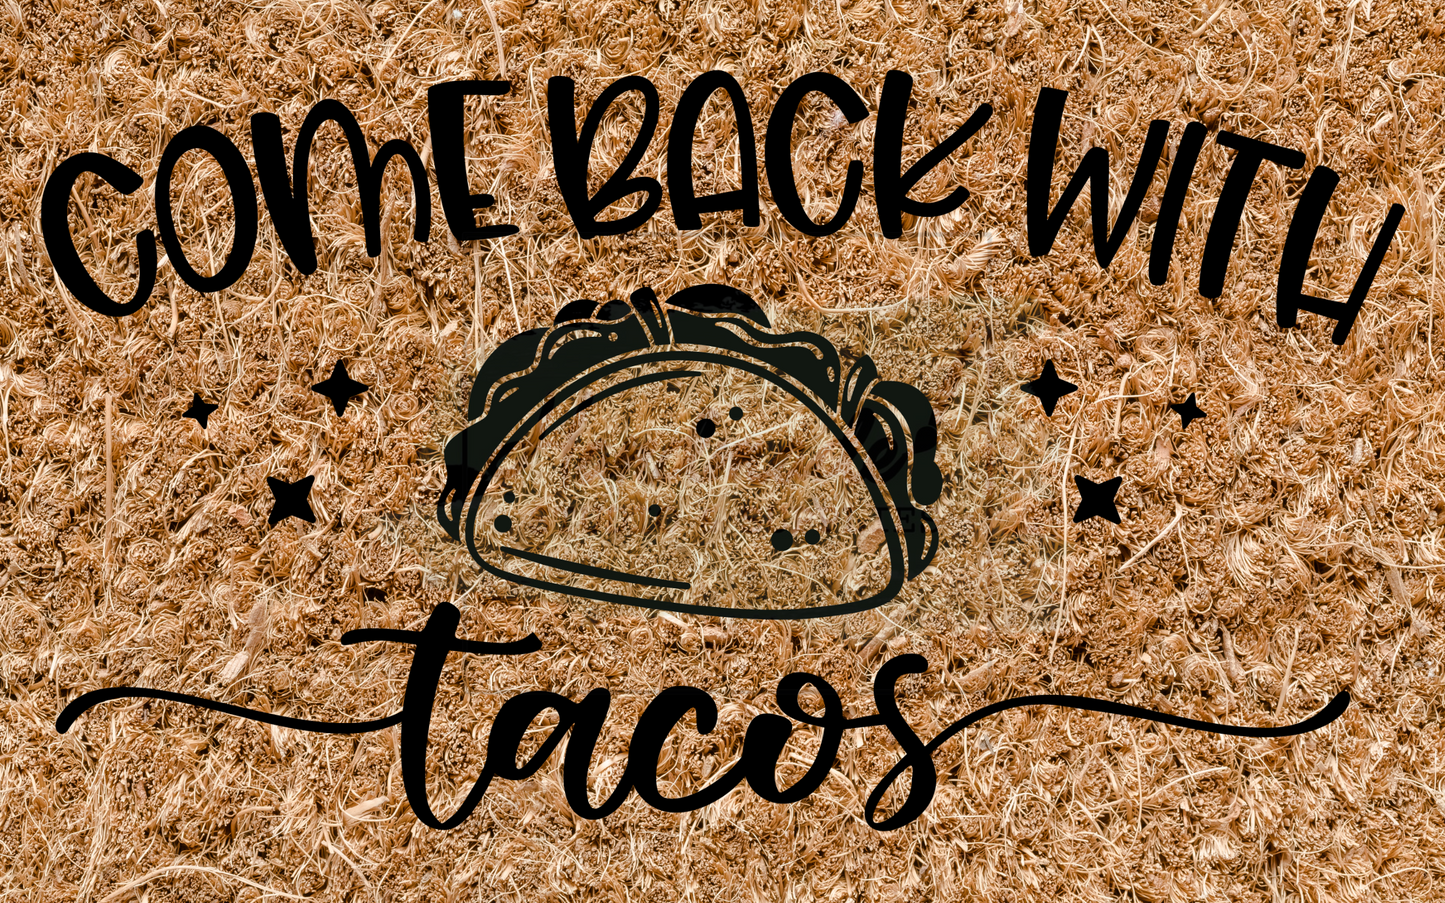 Come back with tacos